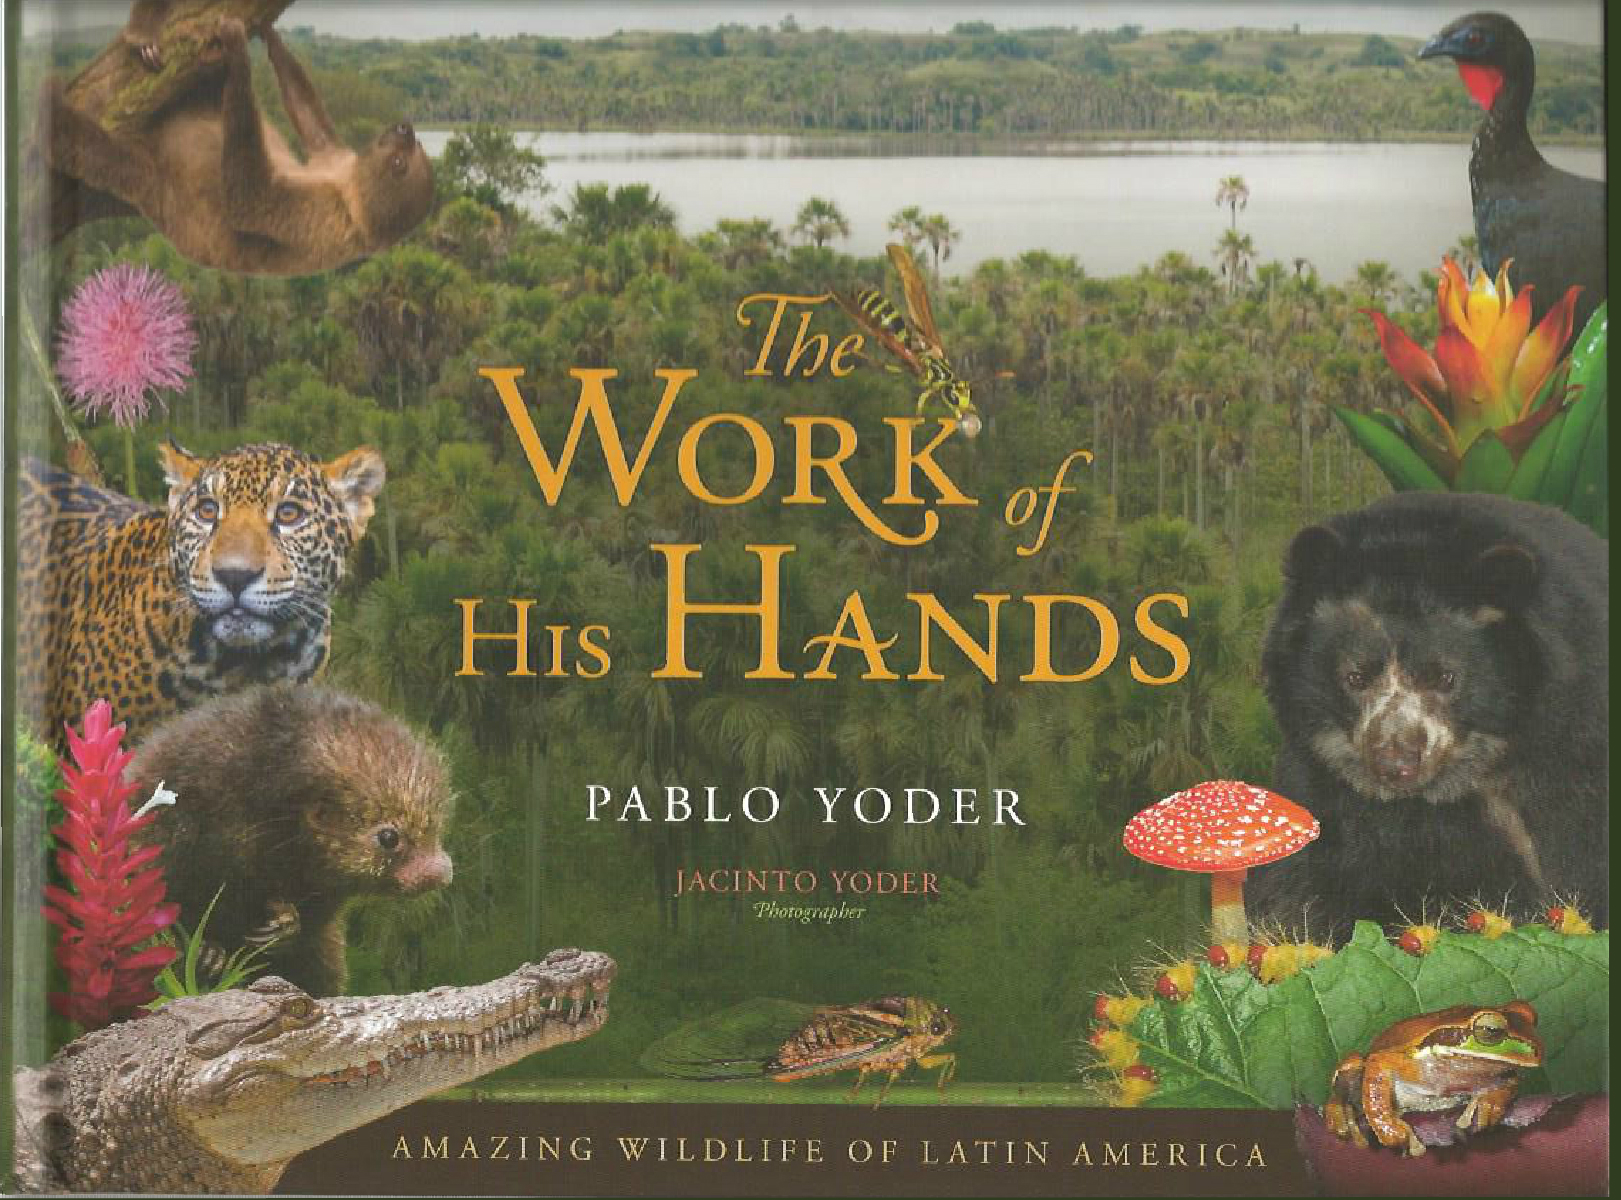 THE WORK OF HIS HANDS Pablo Yoder